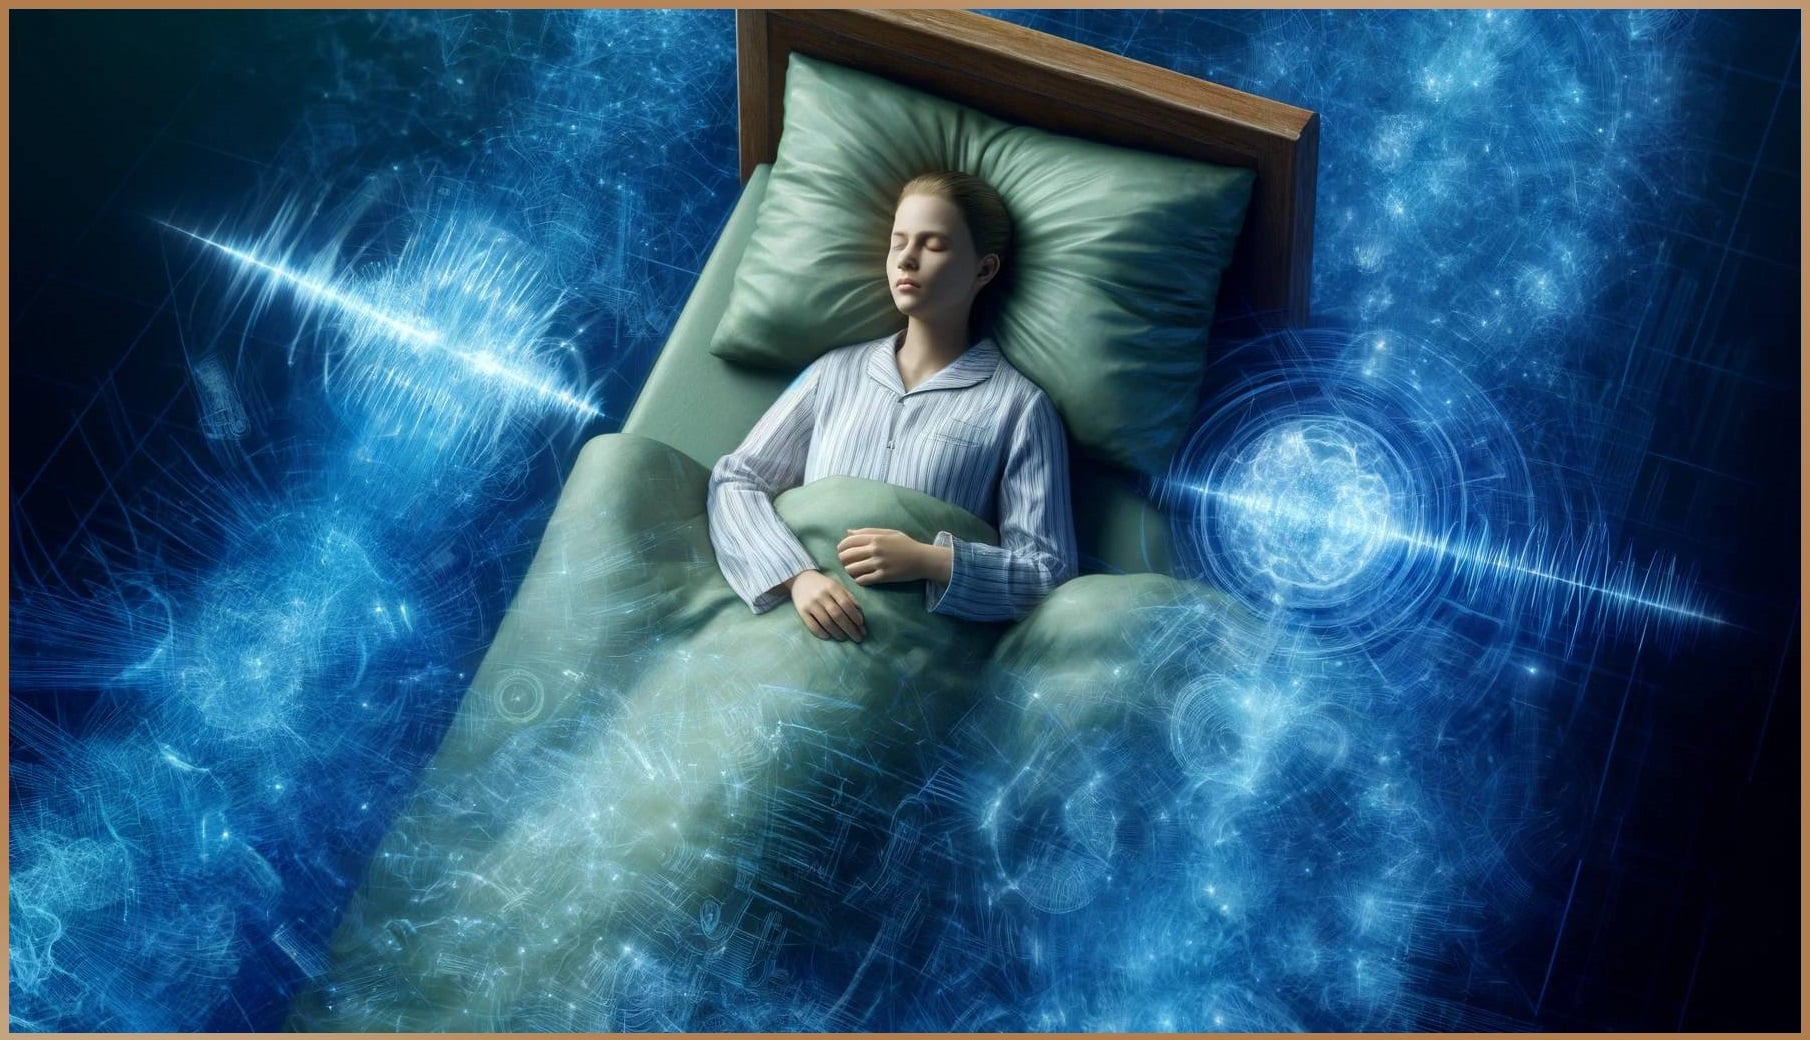 Woman sleeping uneasily in bed surrounded by visible waves of electromagnetic pollution, illustrating the negative impact of electrosmog on human health.